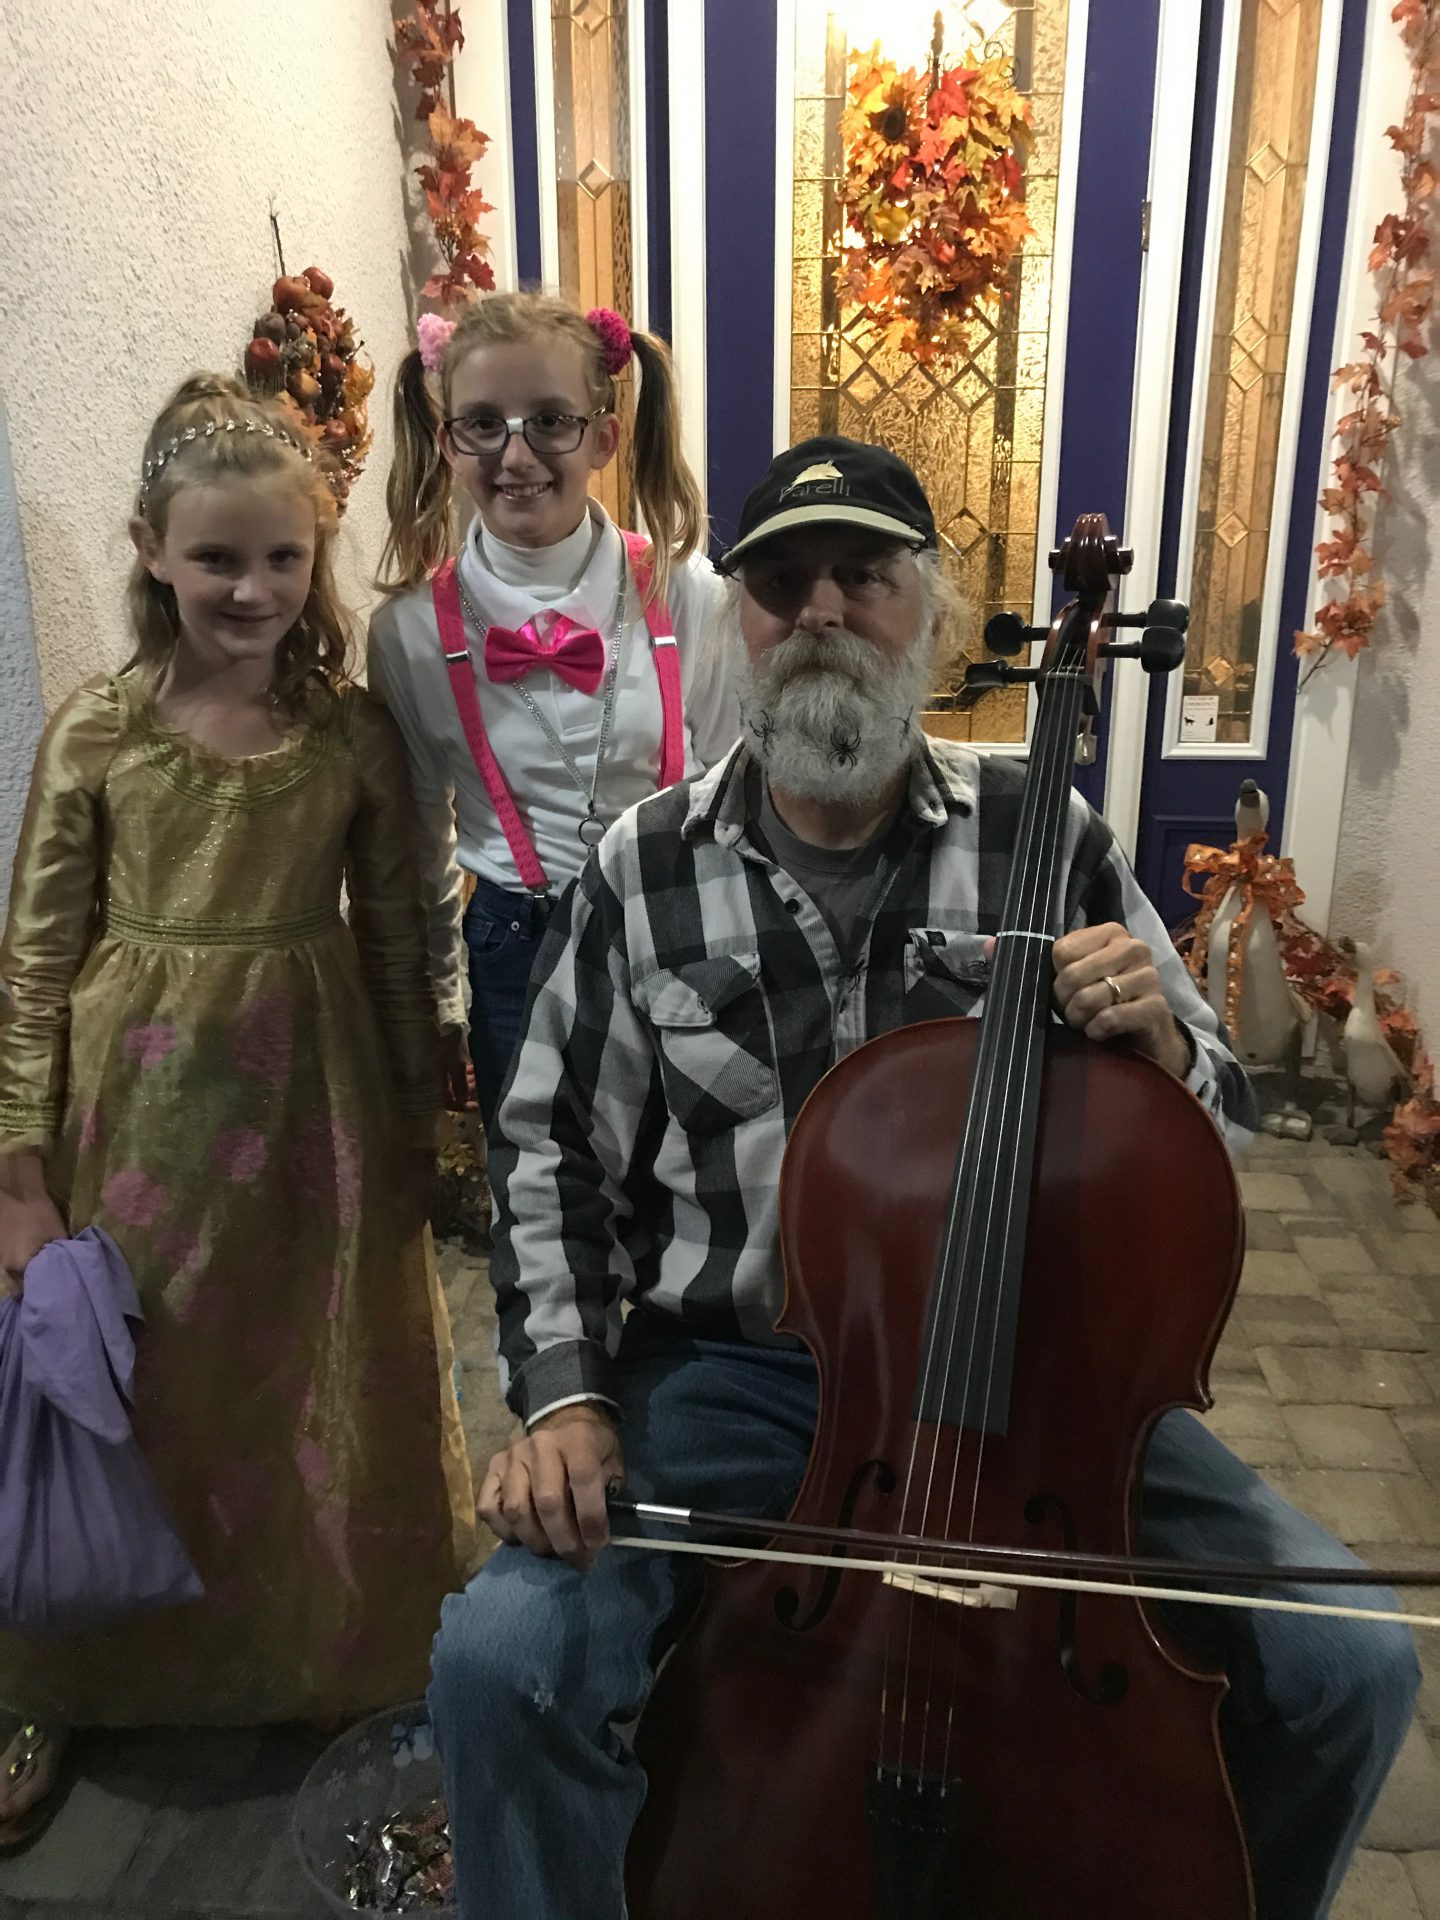 Dave loved playing cello for trick or treaters on Halloween.